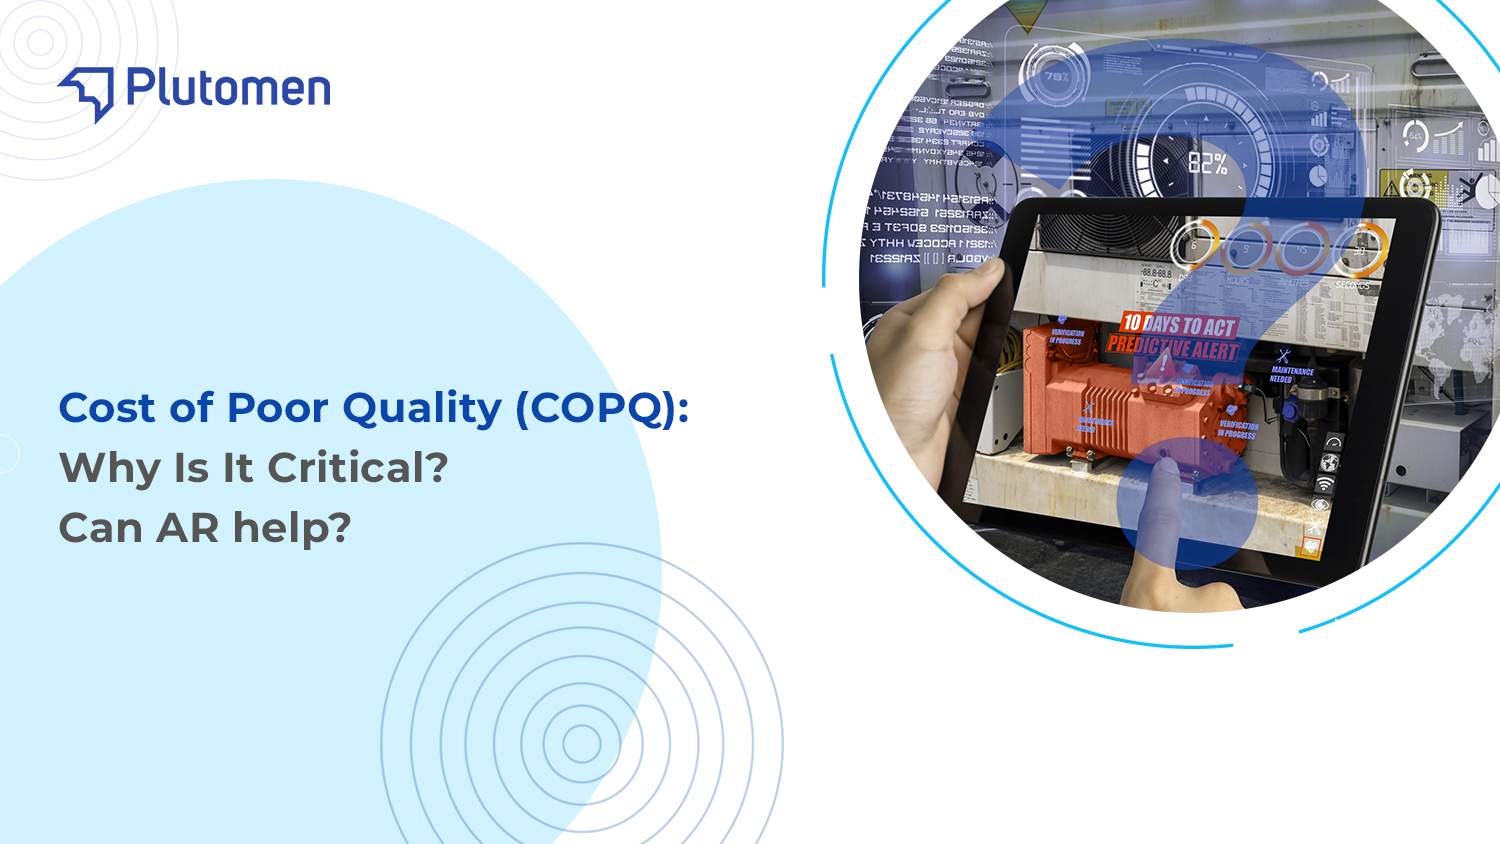 Cost of Poor Quality (COPQ): Why Is It Critical? Can AR help?